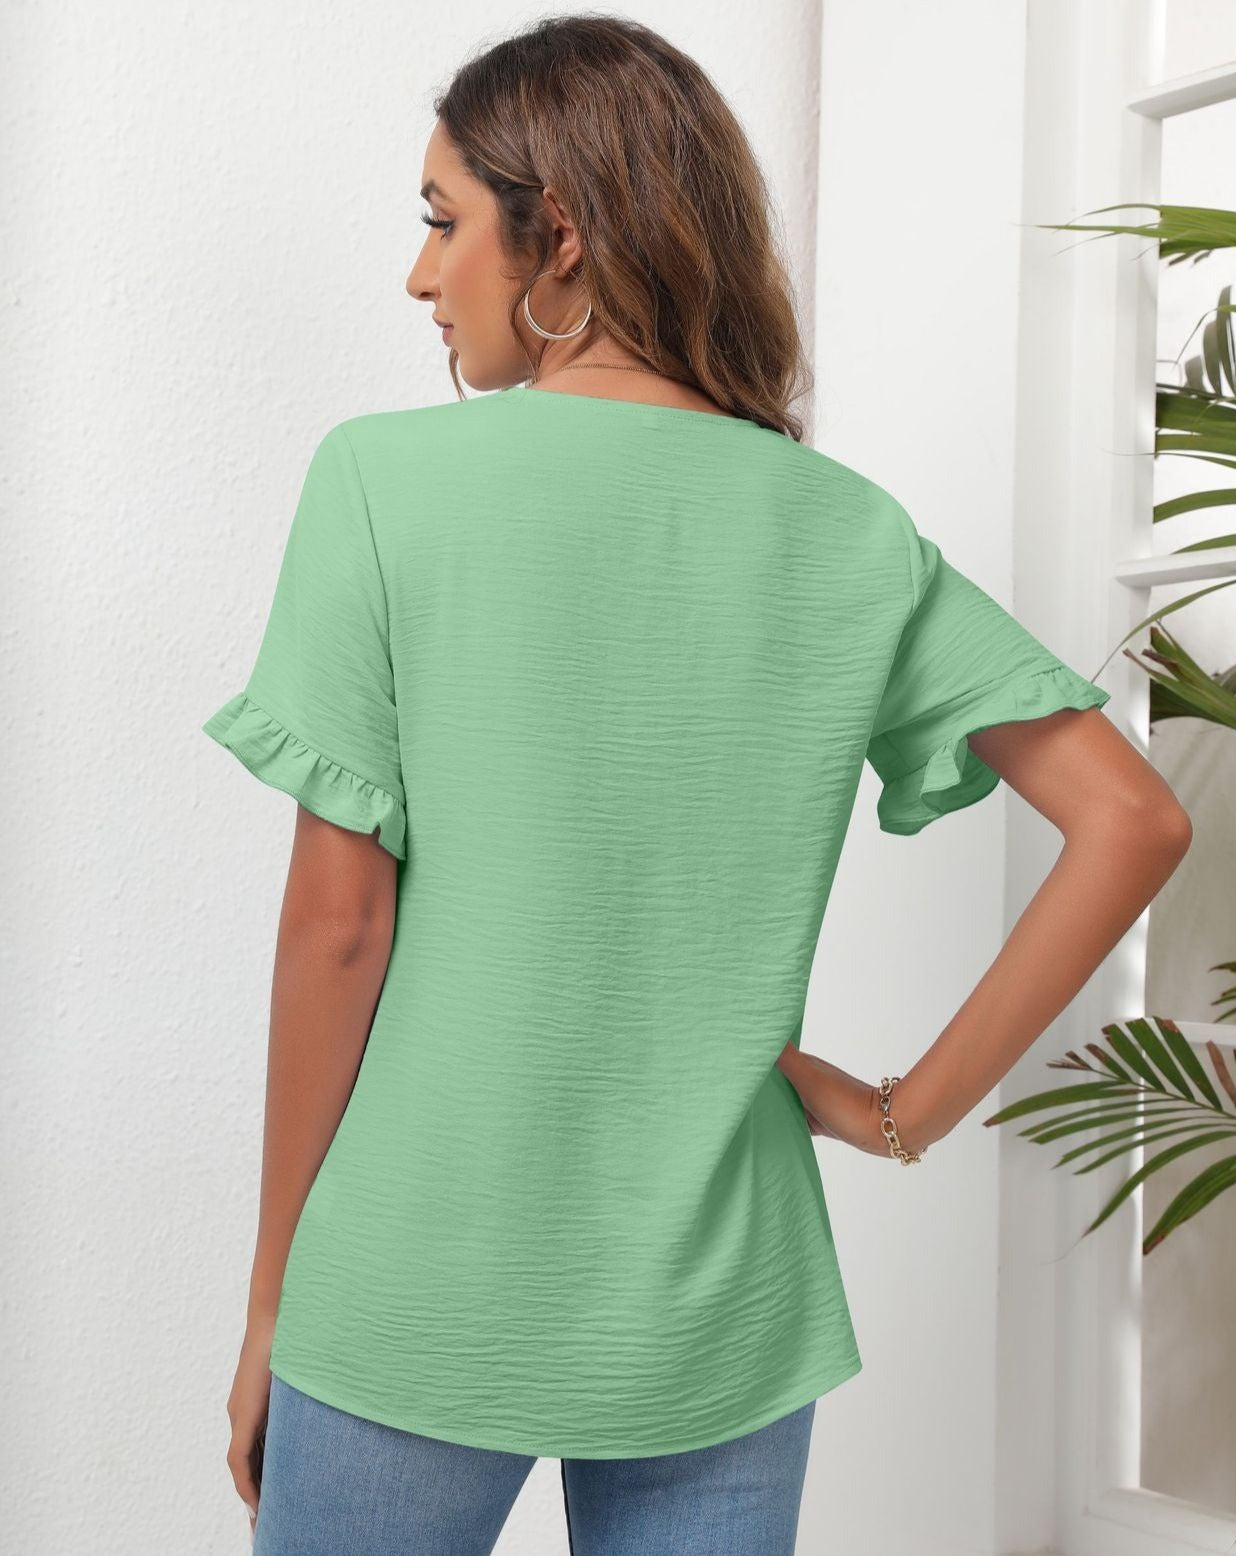 Solid Short Sleeve V Neck Buttons Down Blouse Green